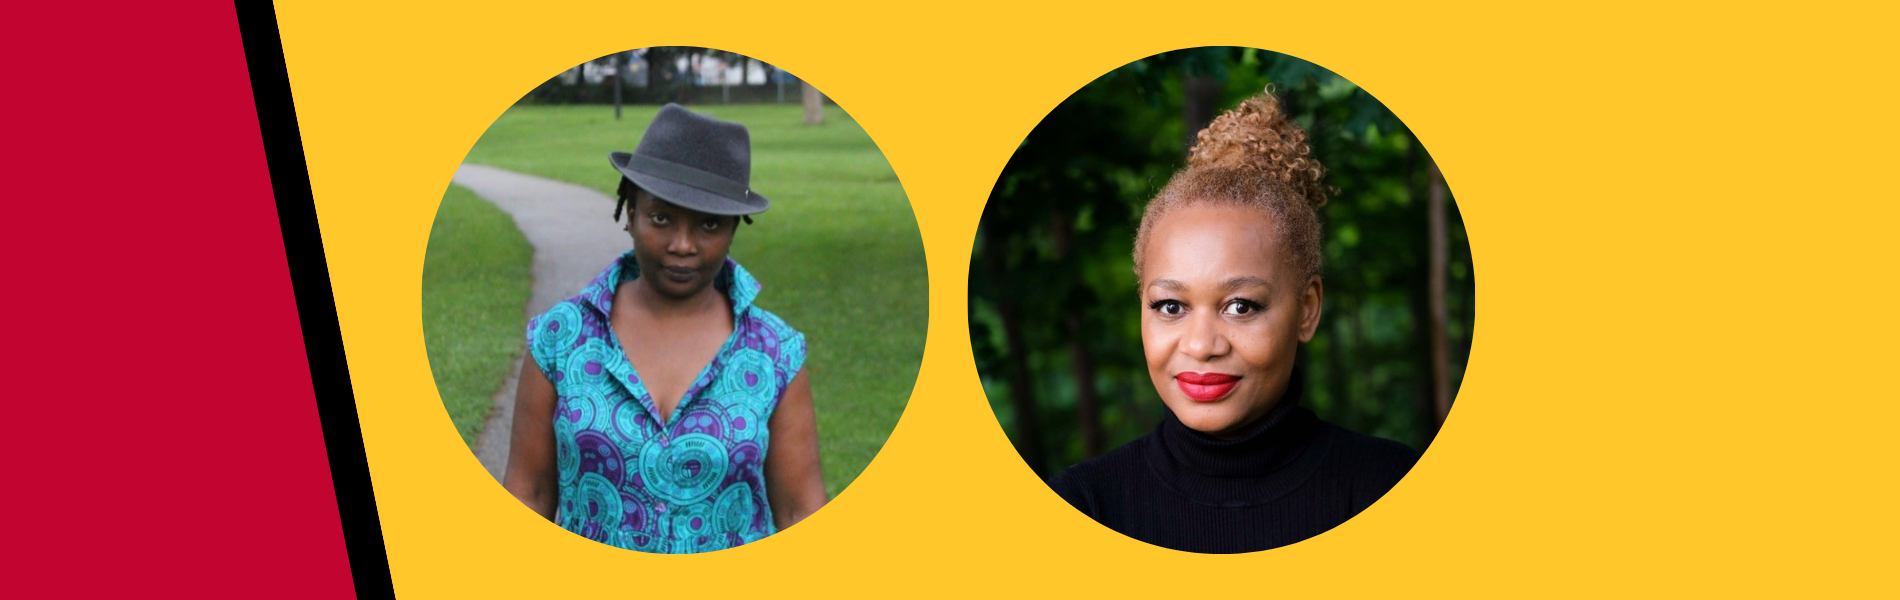 Headshots of Marsha Hinds Myrie and Nneka MacGregor cropped in circles on a yellow and red background.